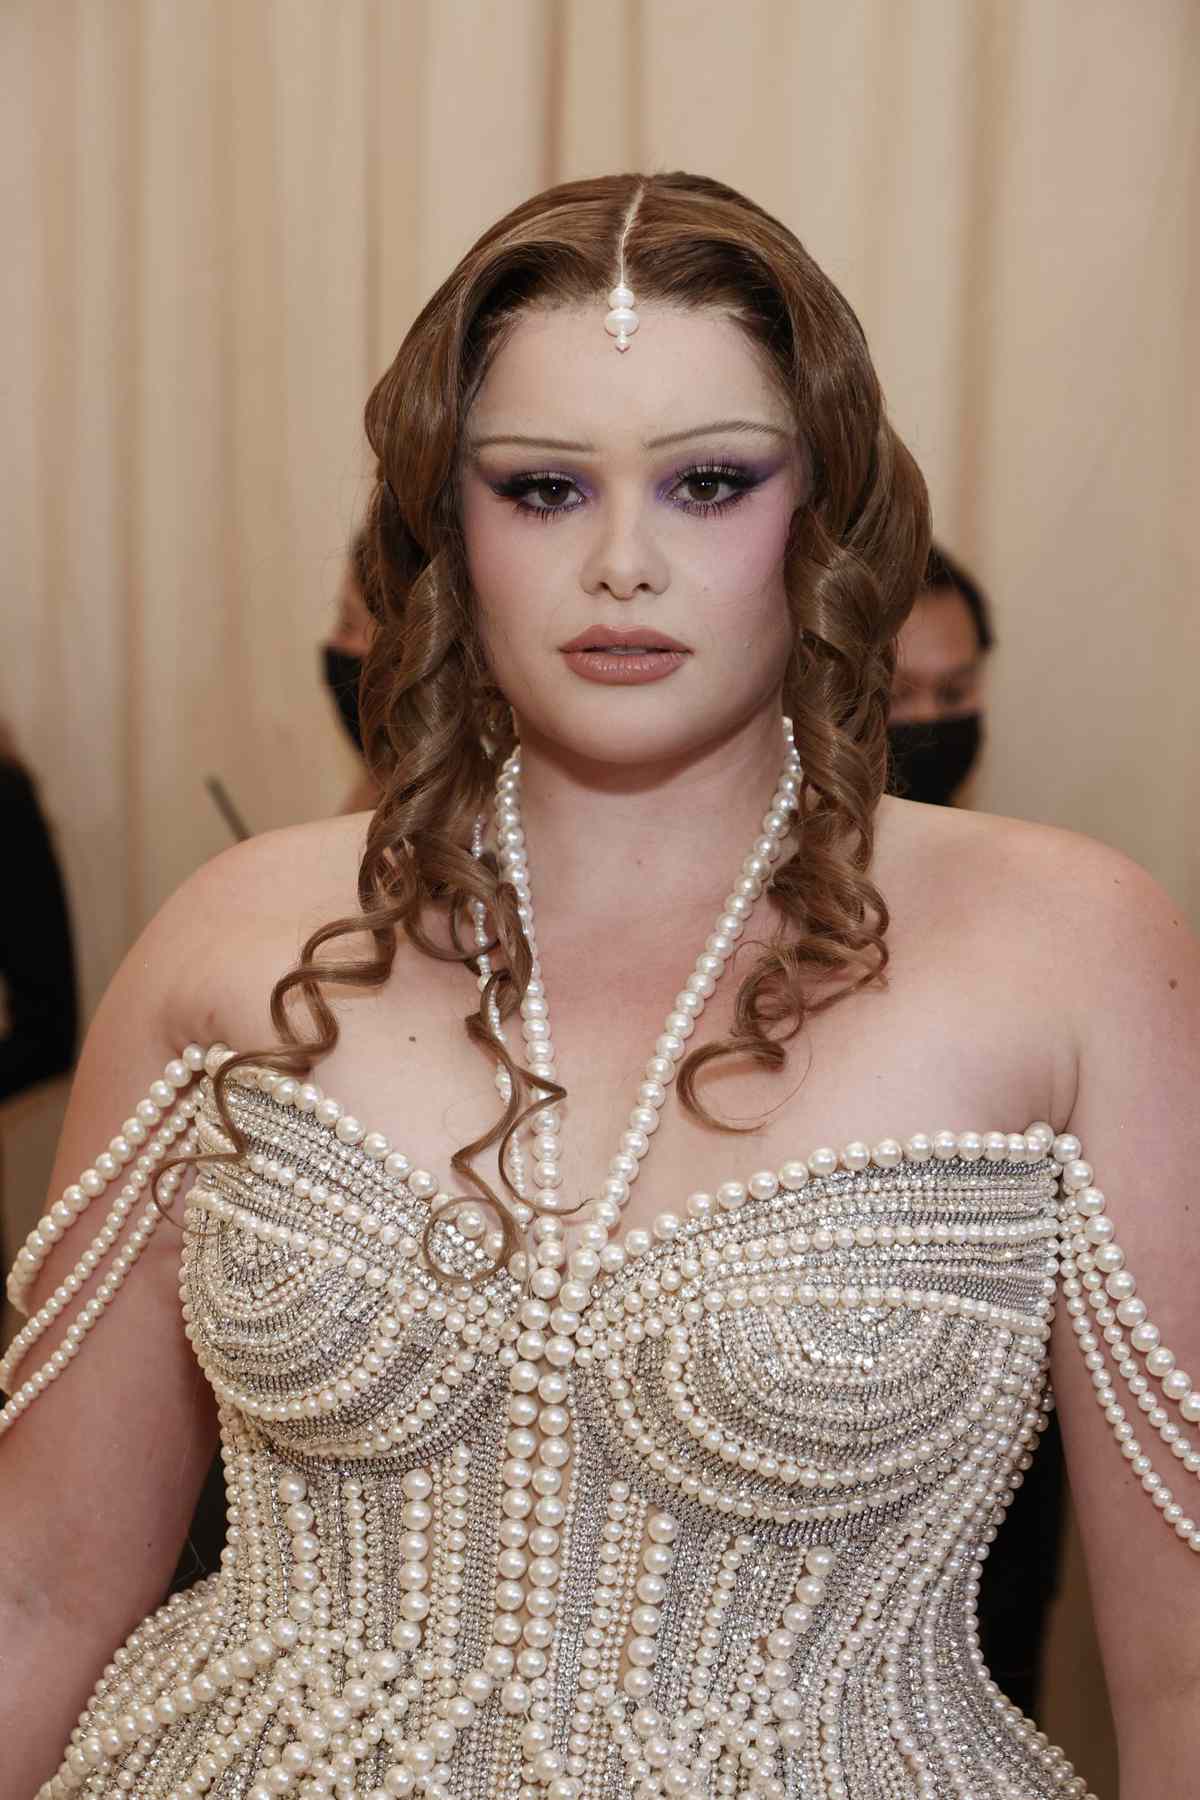 What Is Gilded Glamour Met Gala Theme?